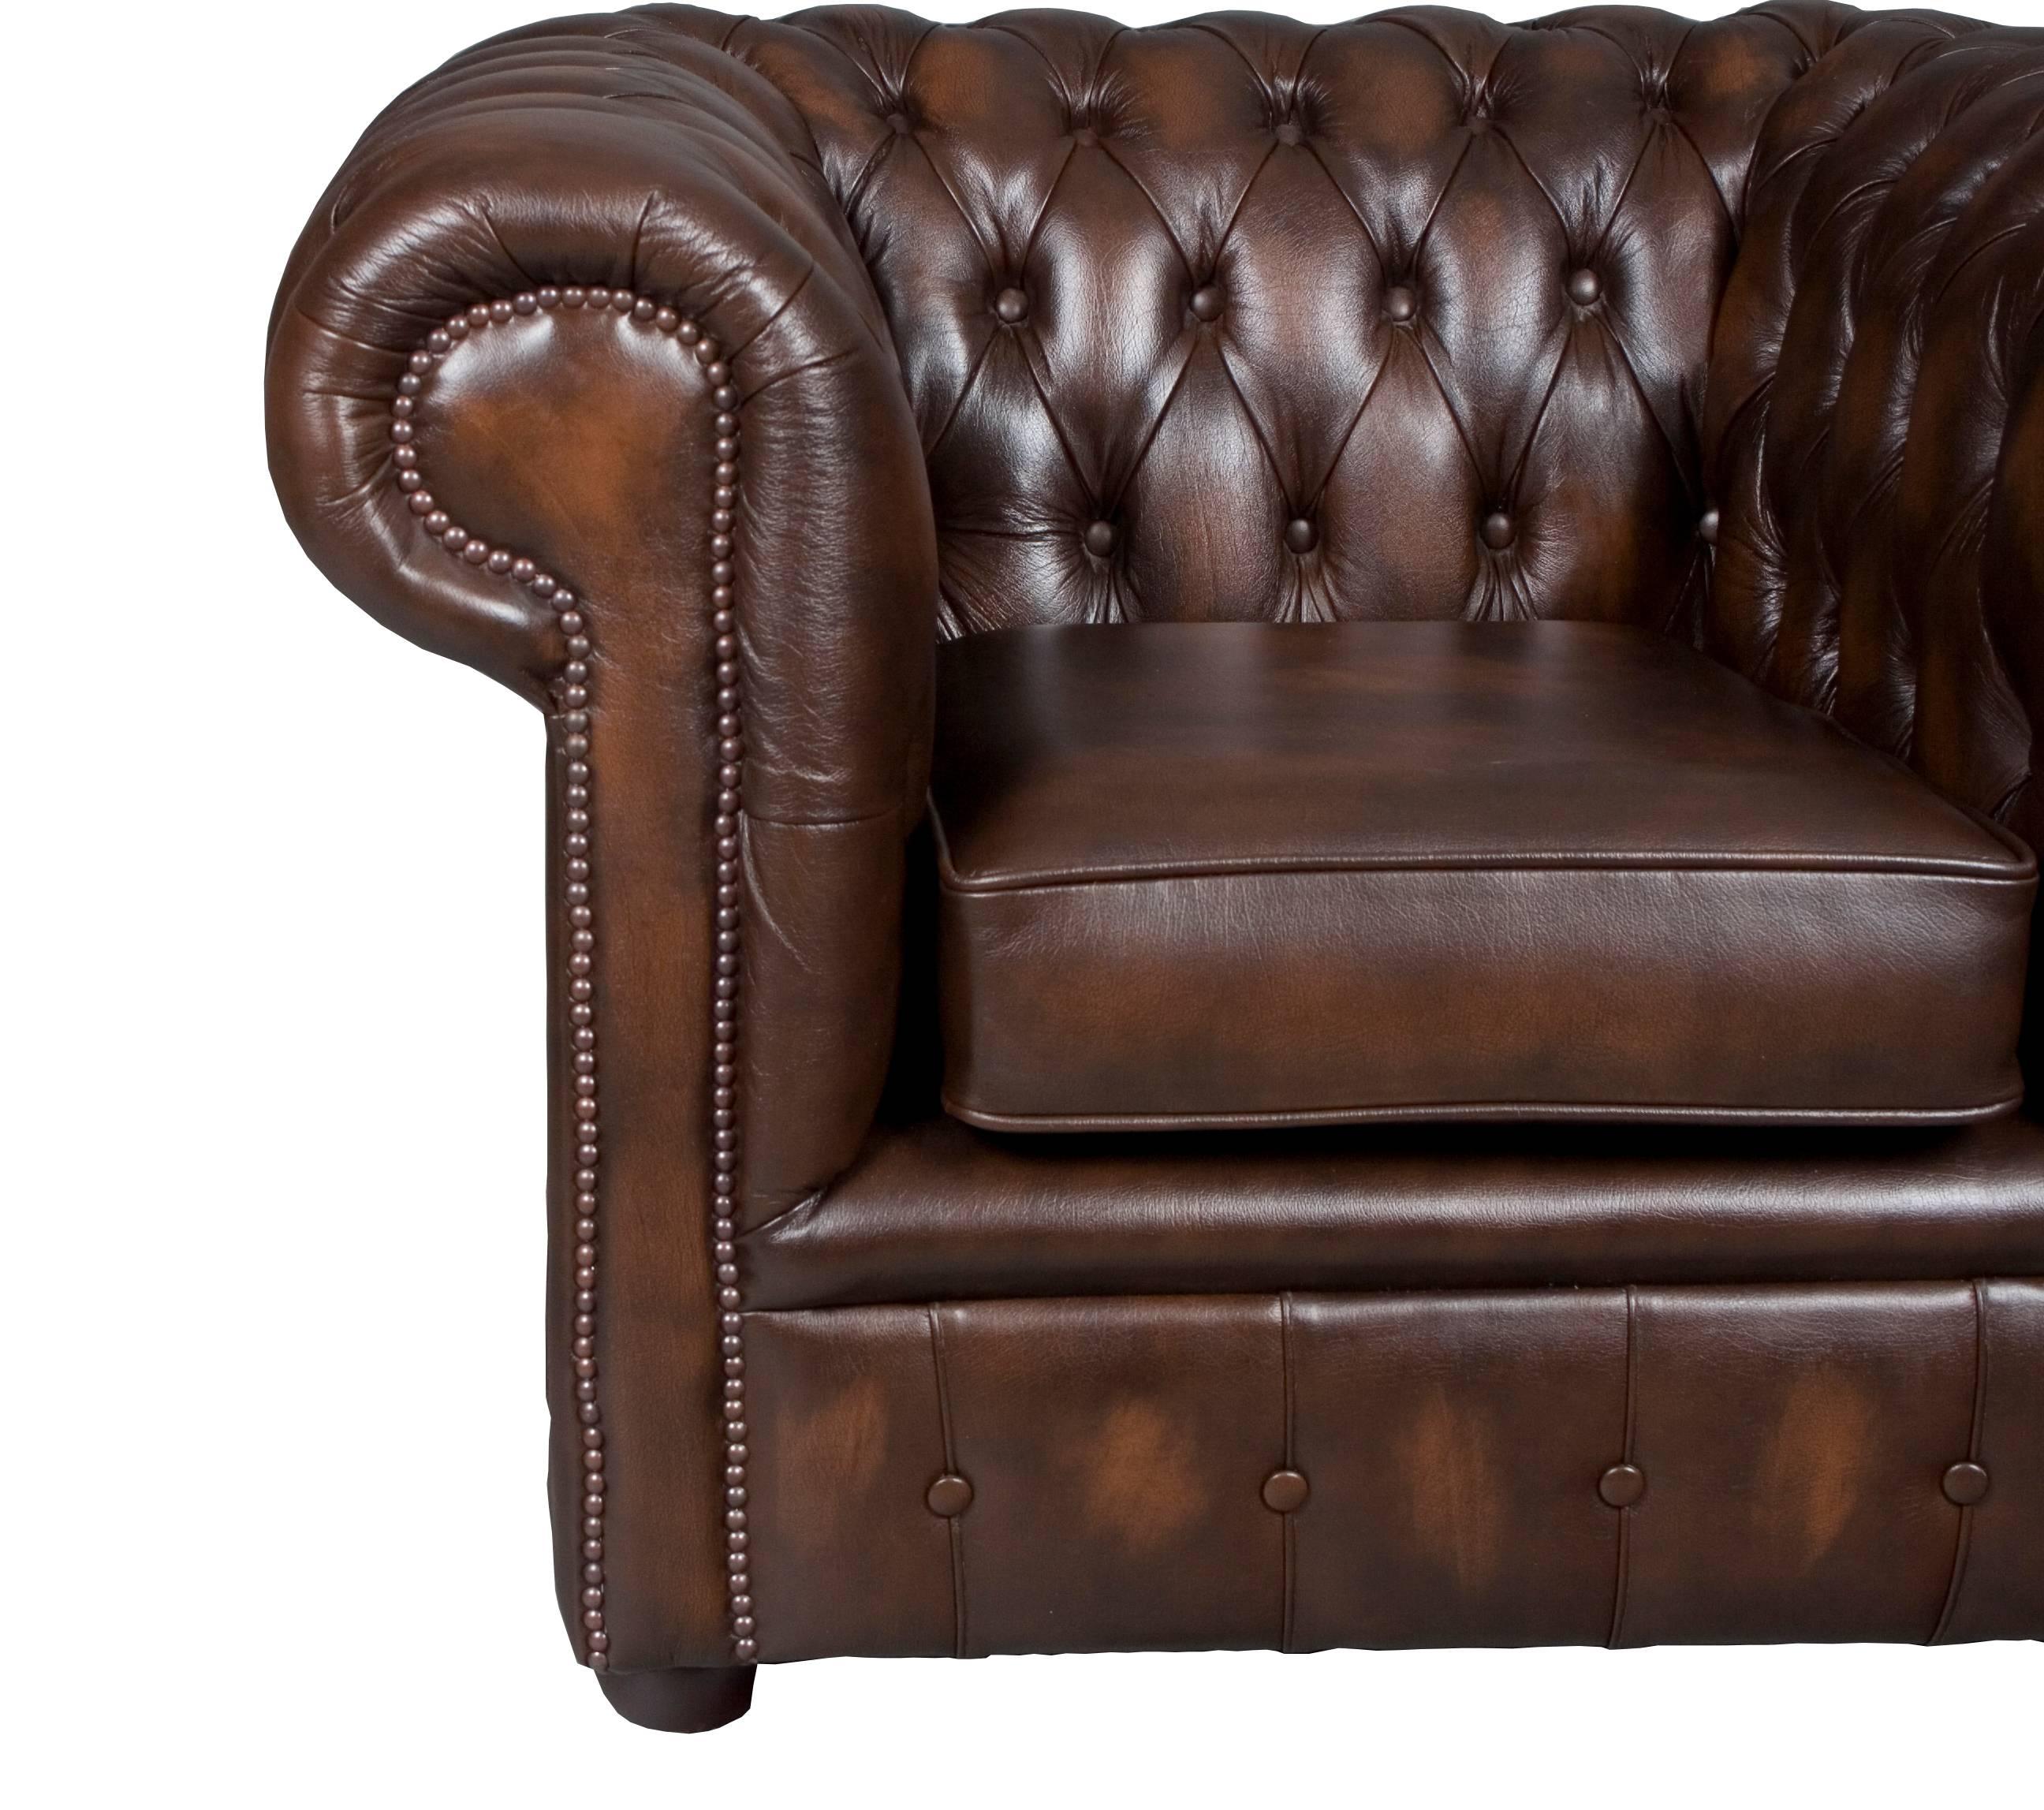 English Tufted Brown Leather Club Chair